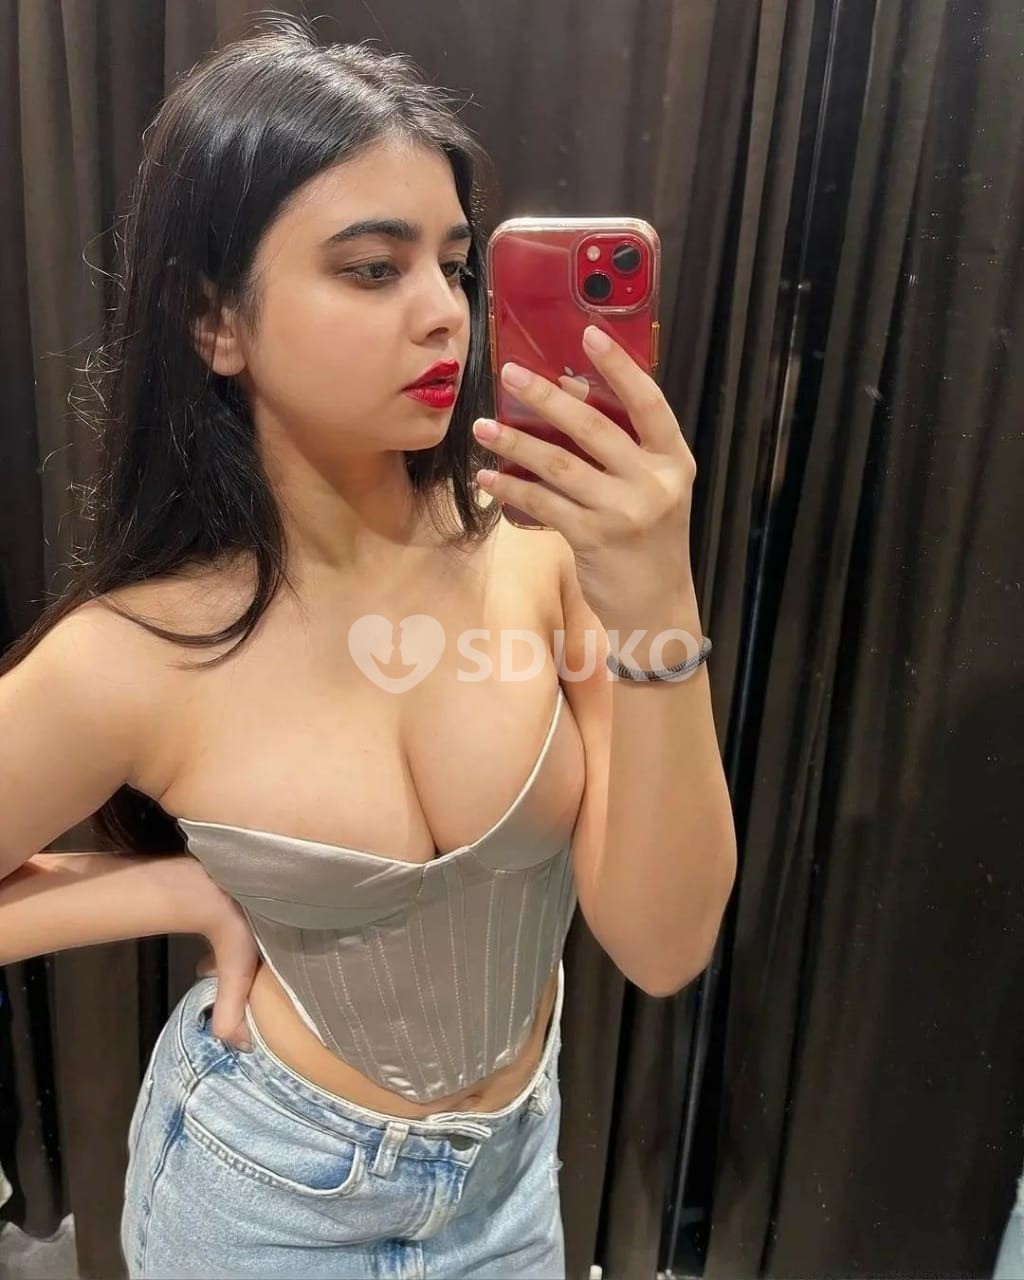 PUNE ALL AREA VIP TODAY ⛱️LOW PRICE ESCORT 🥰SERVICE 100% SAFE AND SECURE ANYTIME CALL ME 24 X 7 SERVICE AVAILABLE